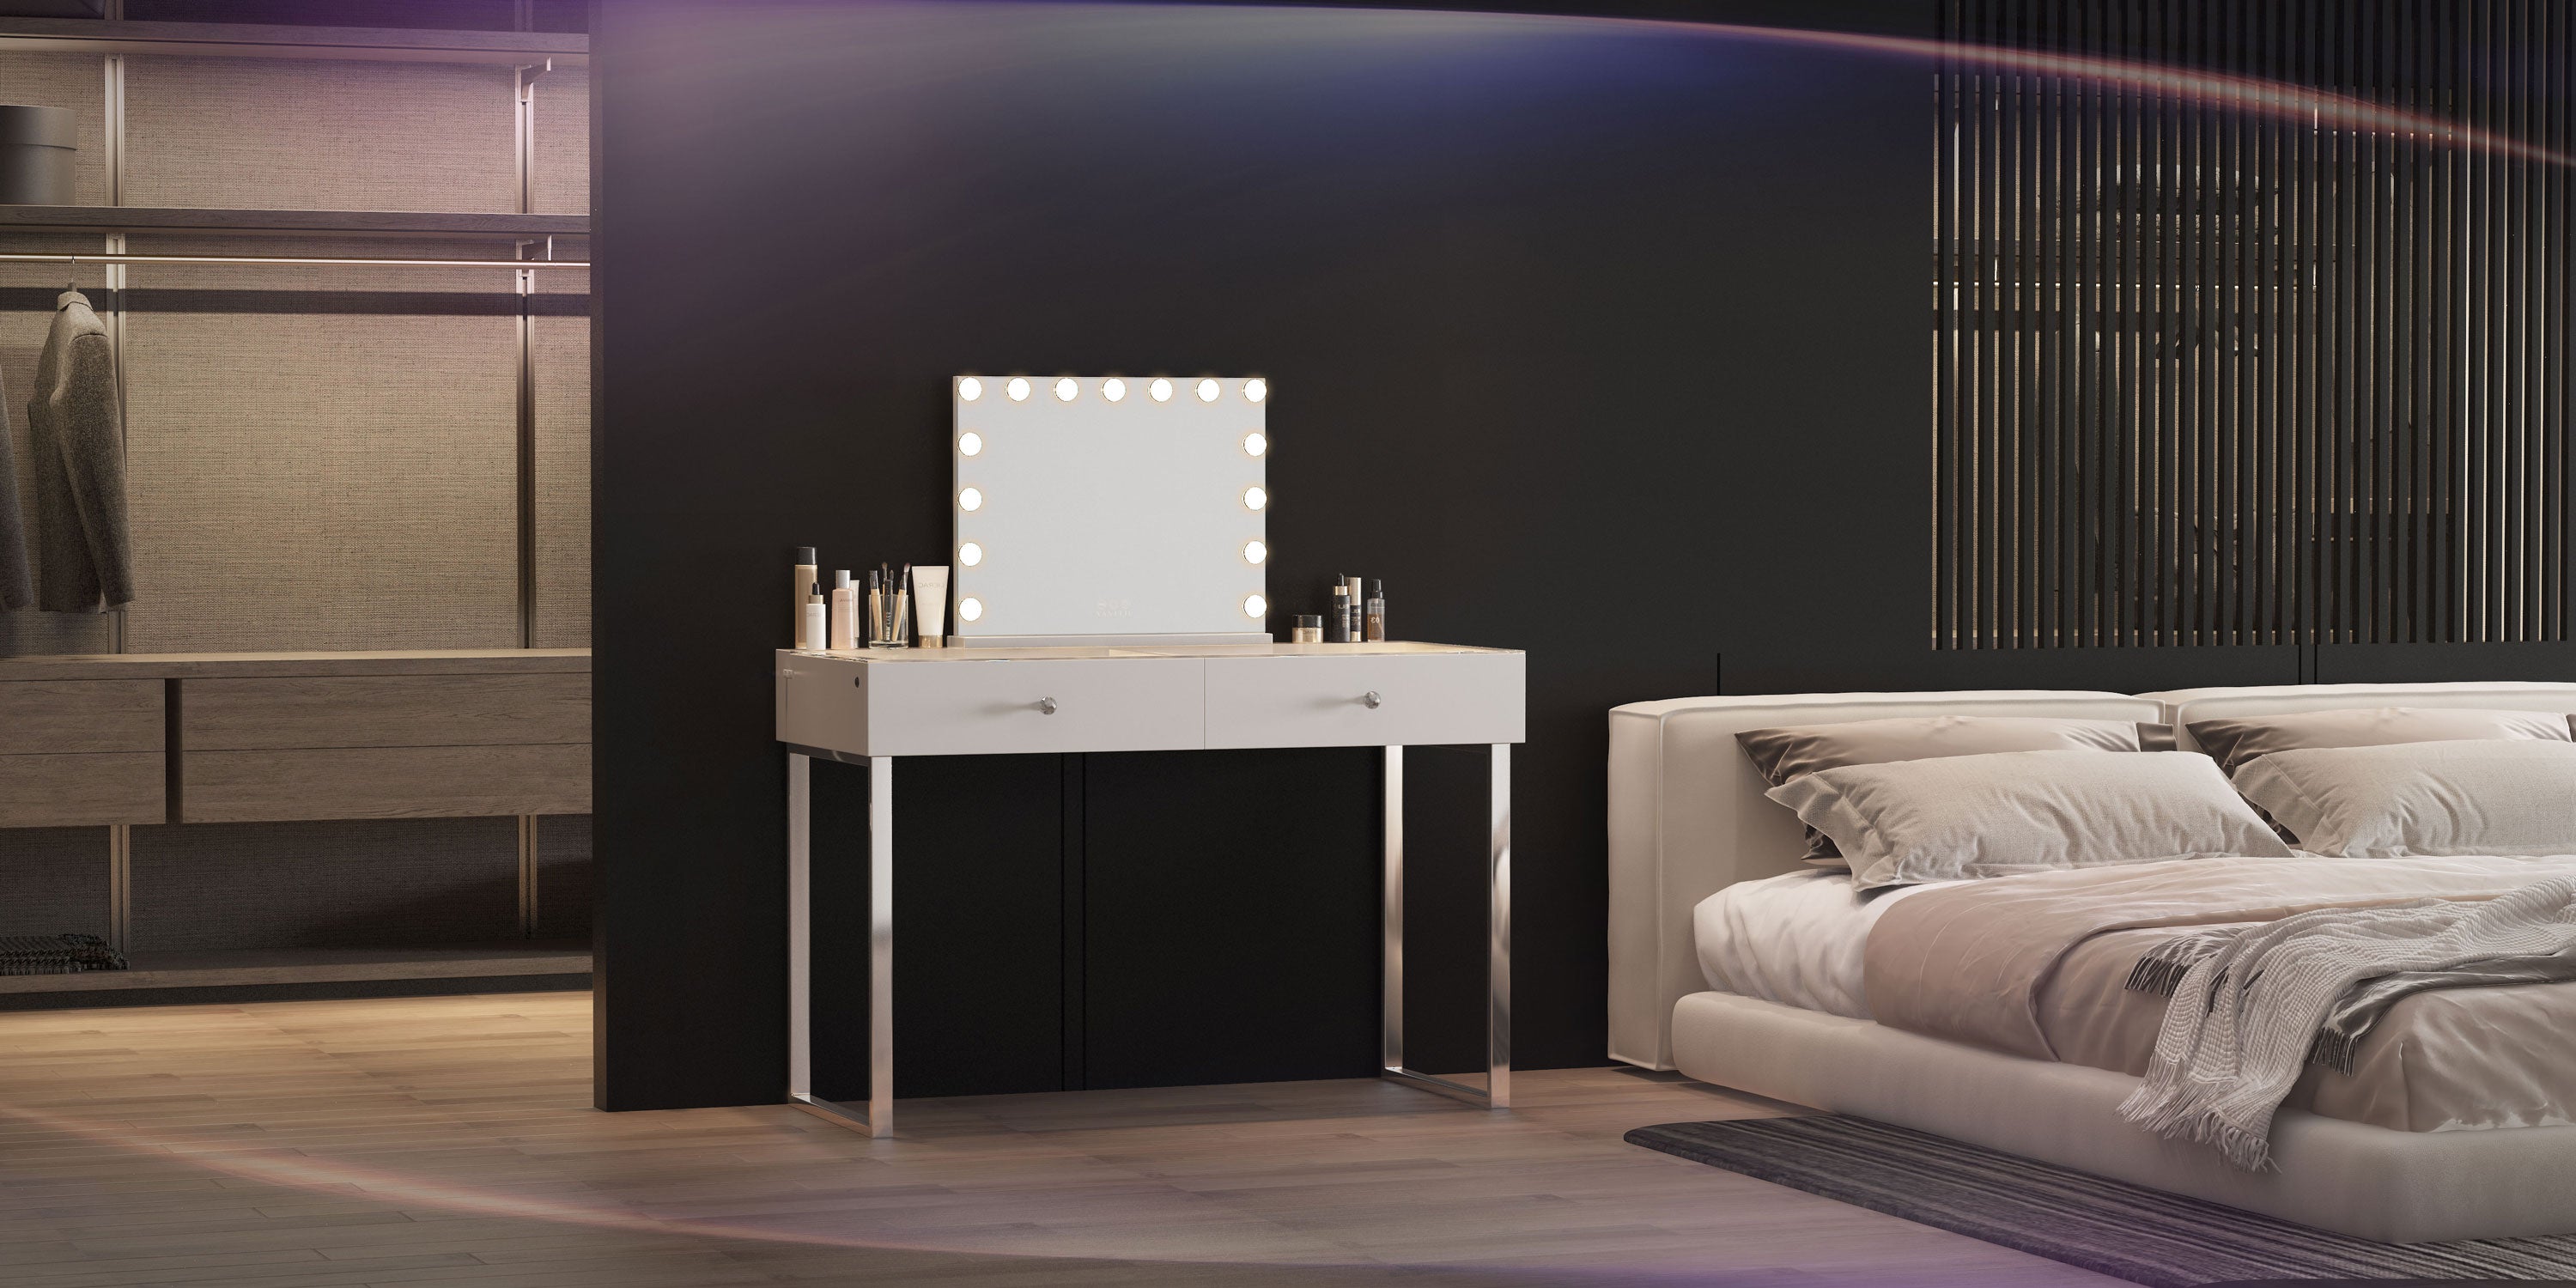 VANITII Vanity Desk - The Perfect Blend of Beauty and Functionality